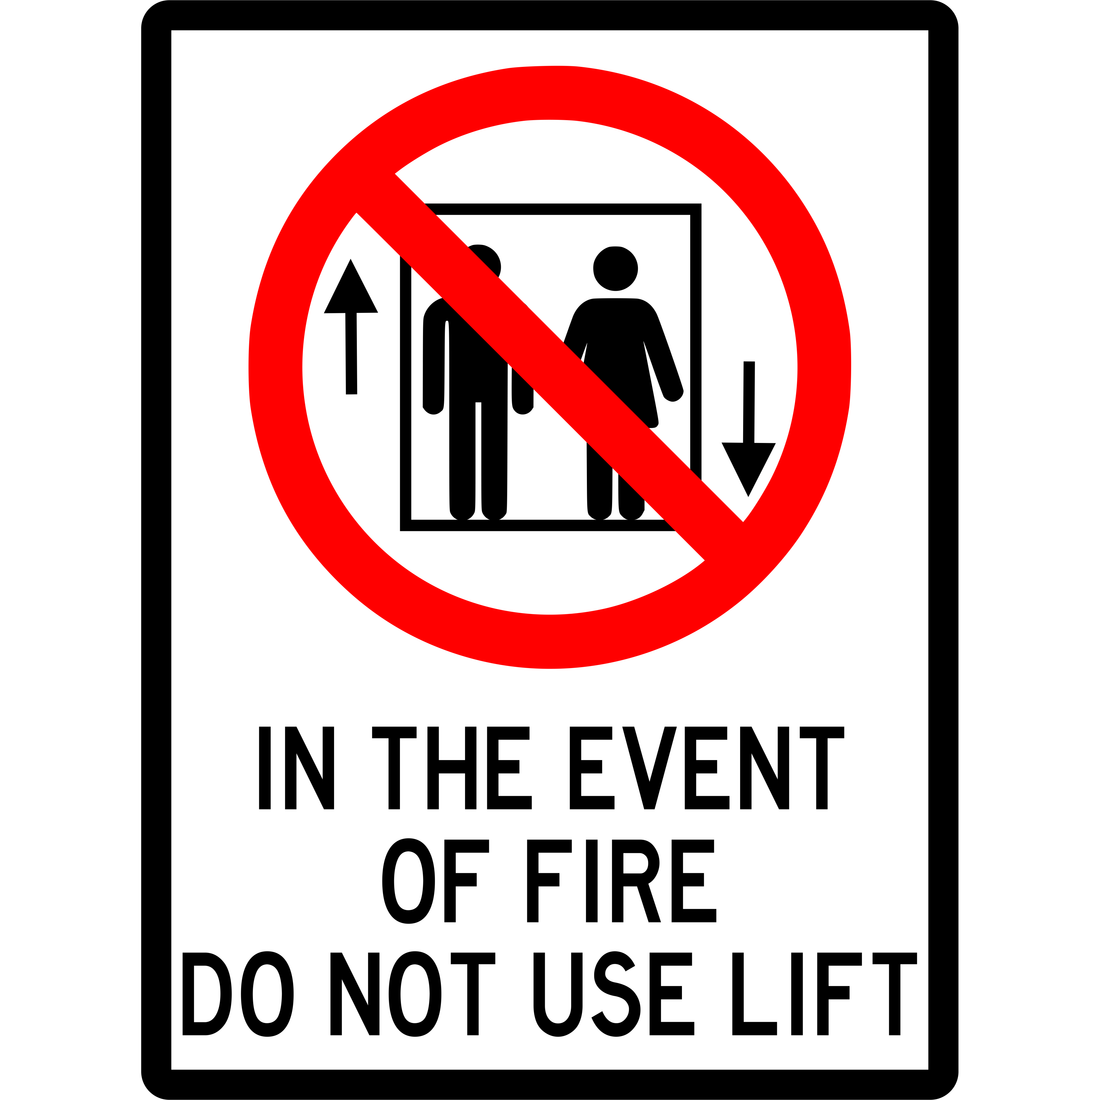 PROHIBITION - IN THE EVENT OF FIRE DO NOT USE LIFT